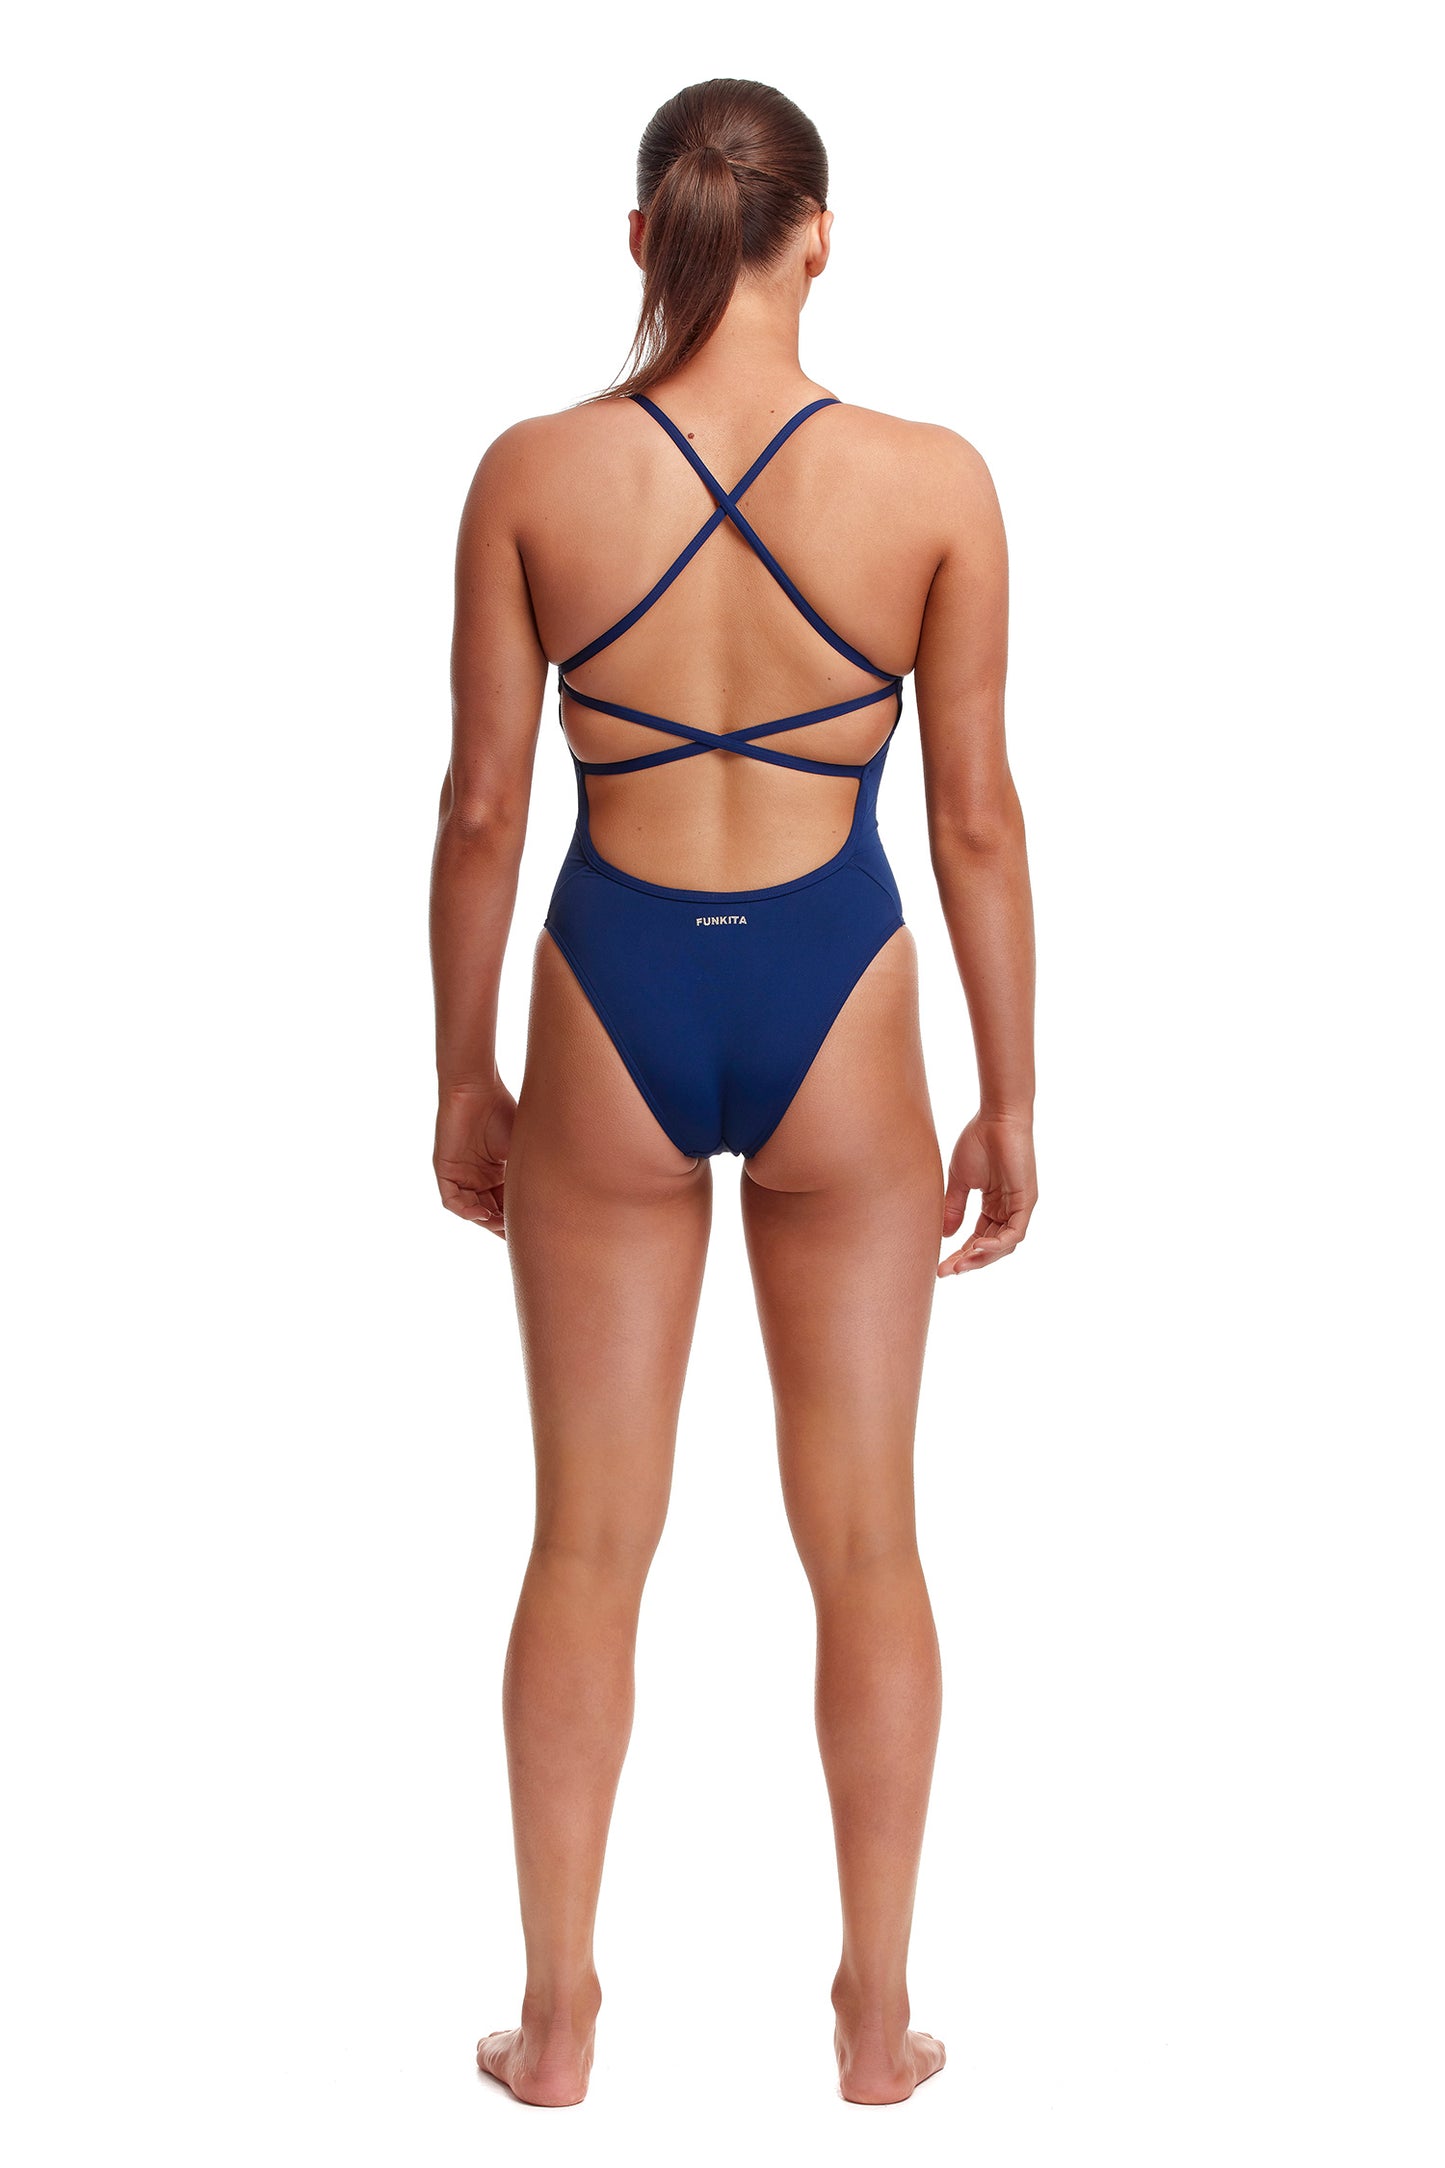 Funkita Ladies Strapped In One Piece Zinc'd